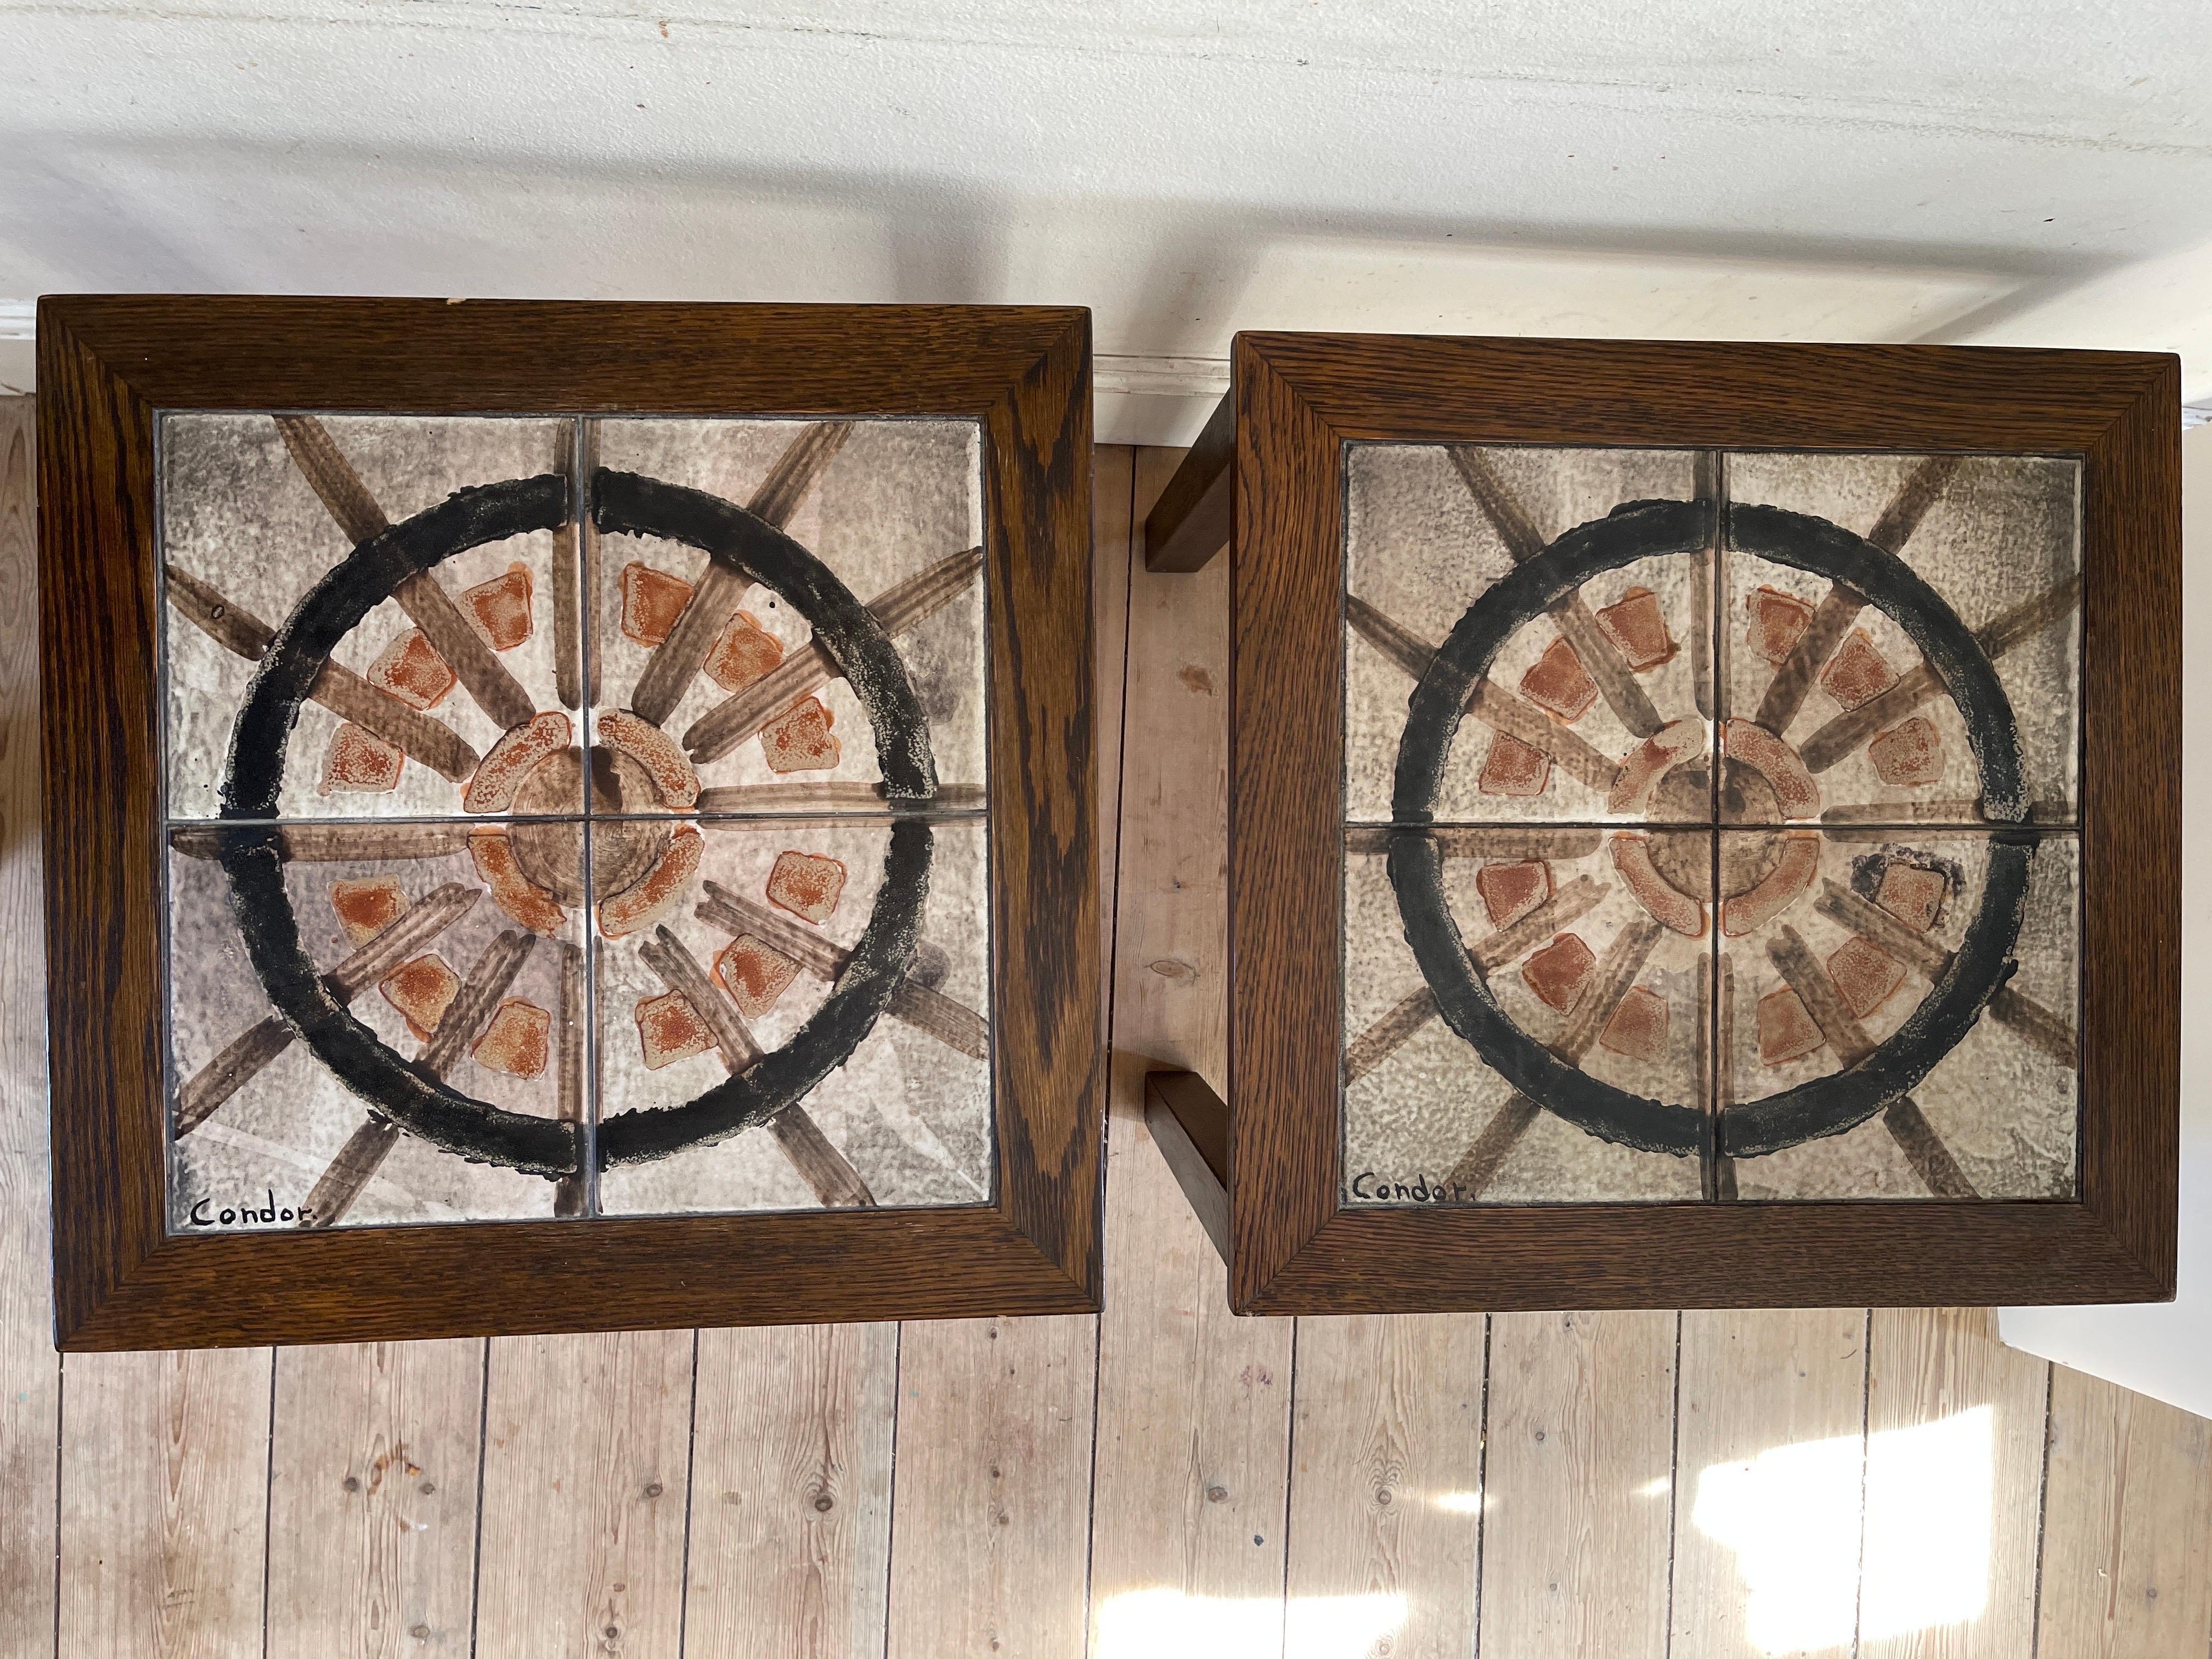 Hand-Crafted Danish Oak Side Tables With Hand Painted Tile Tops In the Manner of Picasso For Sale